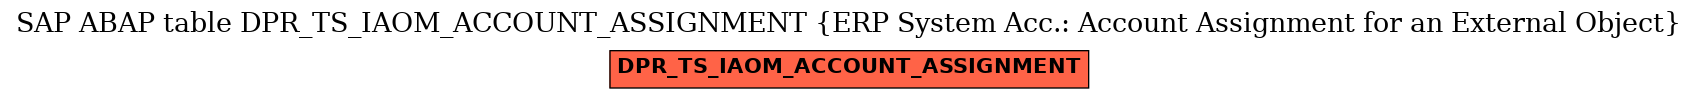 E-R Diagram for table DPR_TS_IAOM_ACCOUNT_ASSIGNMENT (ERP System Acc.: Account Assignment for an External Object)